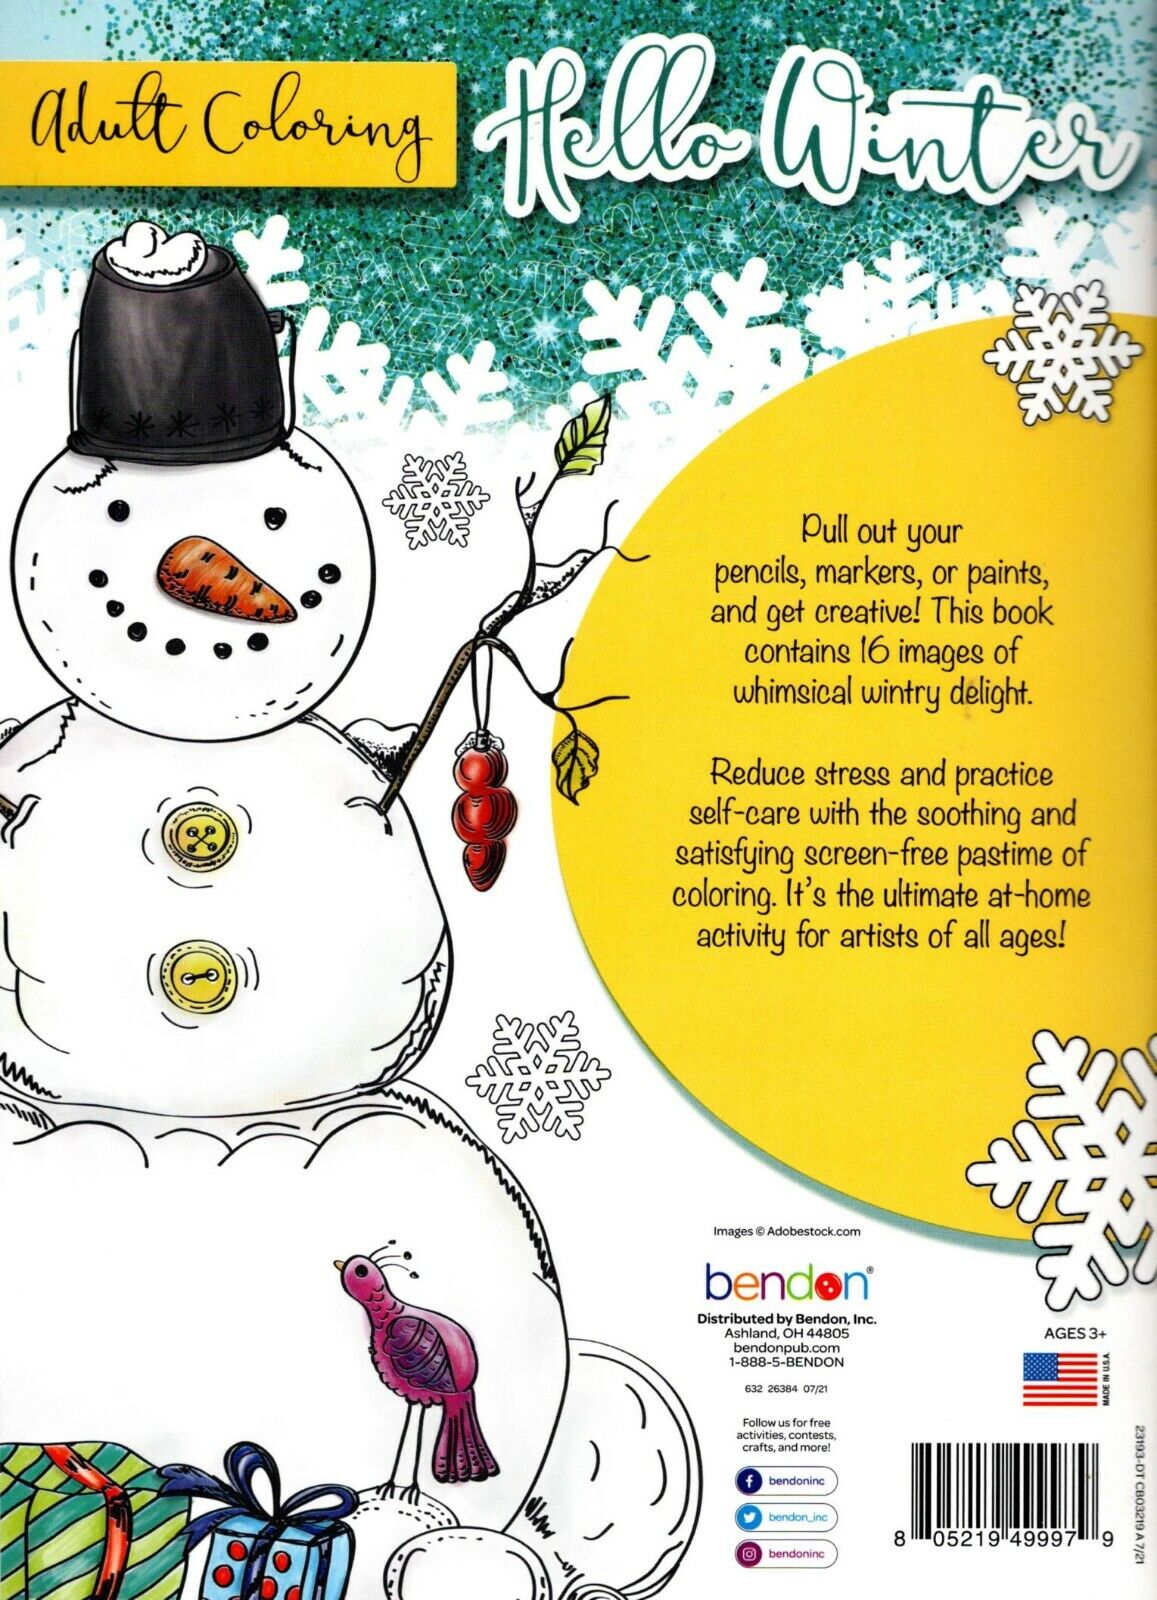 Christmas Holiday - Hello Winter - Coloring Books for Adults